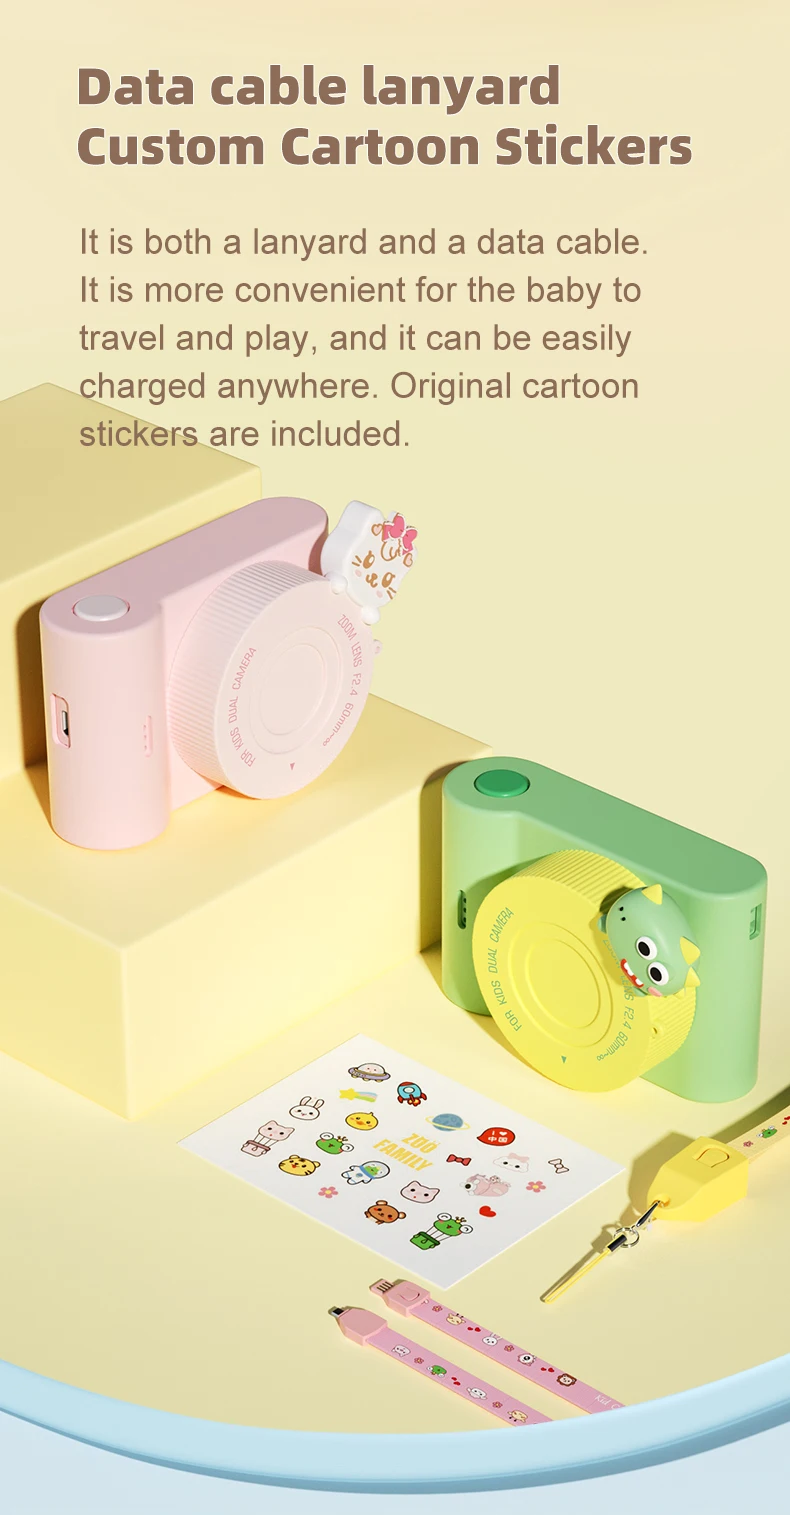 Kids Digital Camera 1080p Photo Video Camera Children 3.0 Inch Touch Screen Camcorder Cameras 48M Pixels Cute Toy Christmas Gift